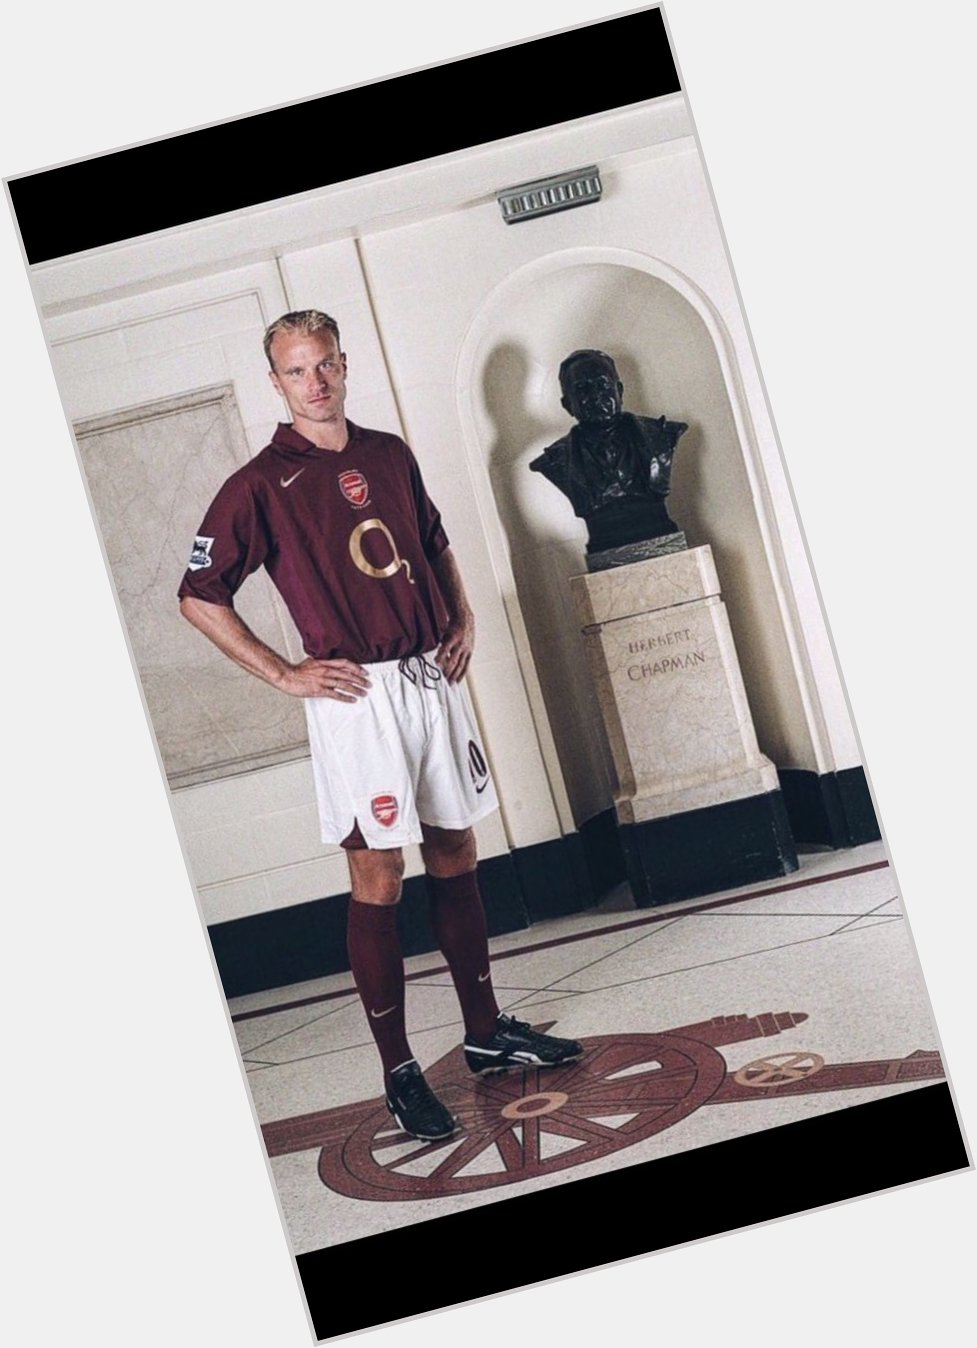 Happy Birthday to the great Dennis Bergkamp who s 52 today. Fitting that our famous number 10 was born on the 10th 